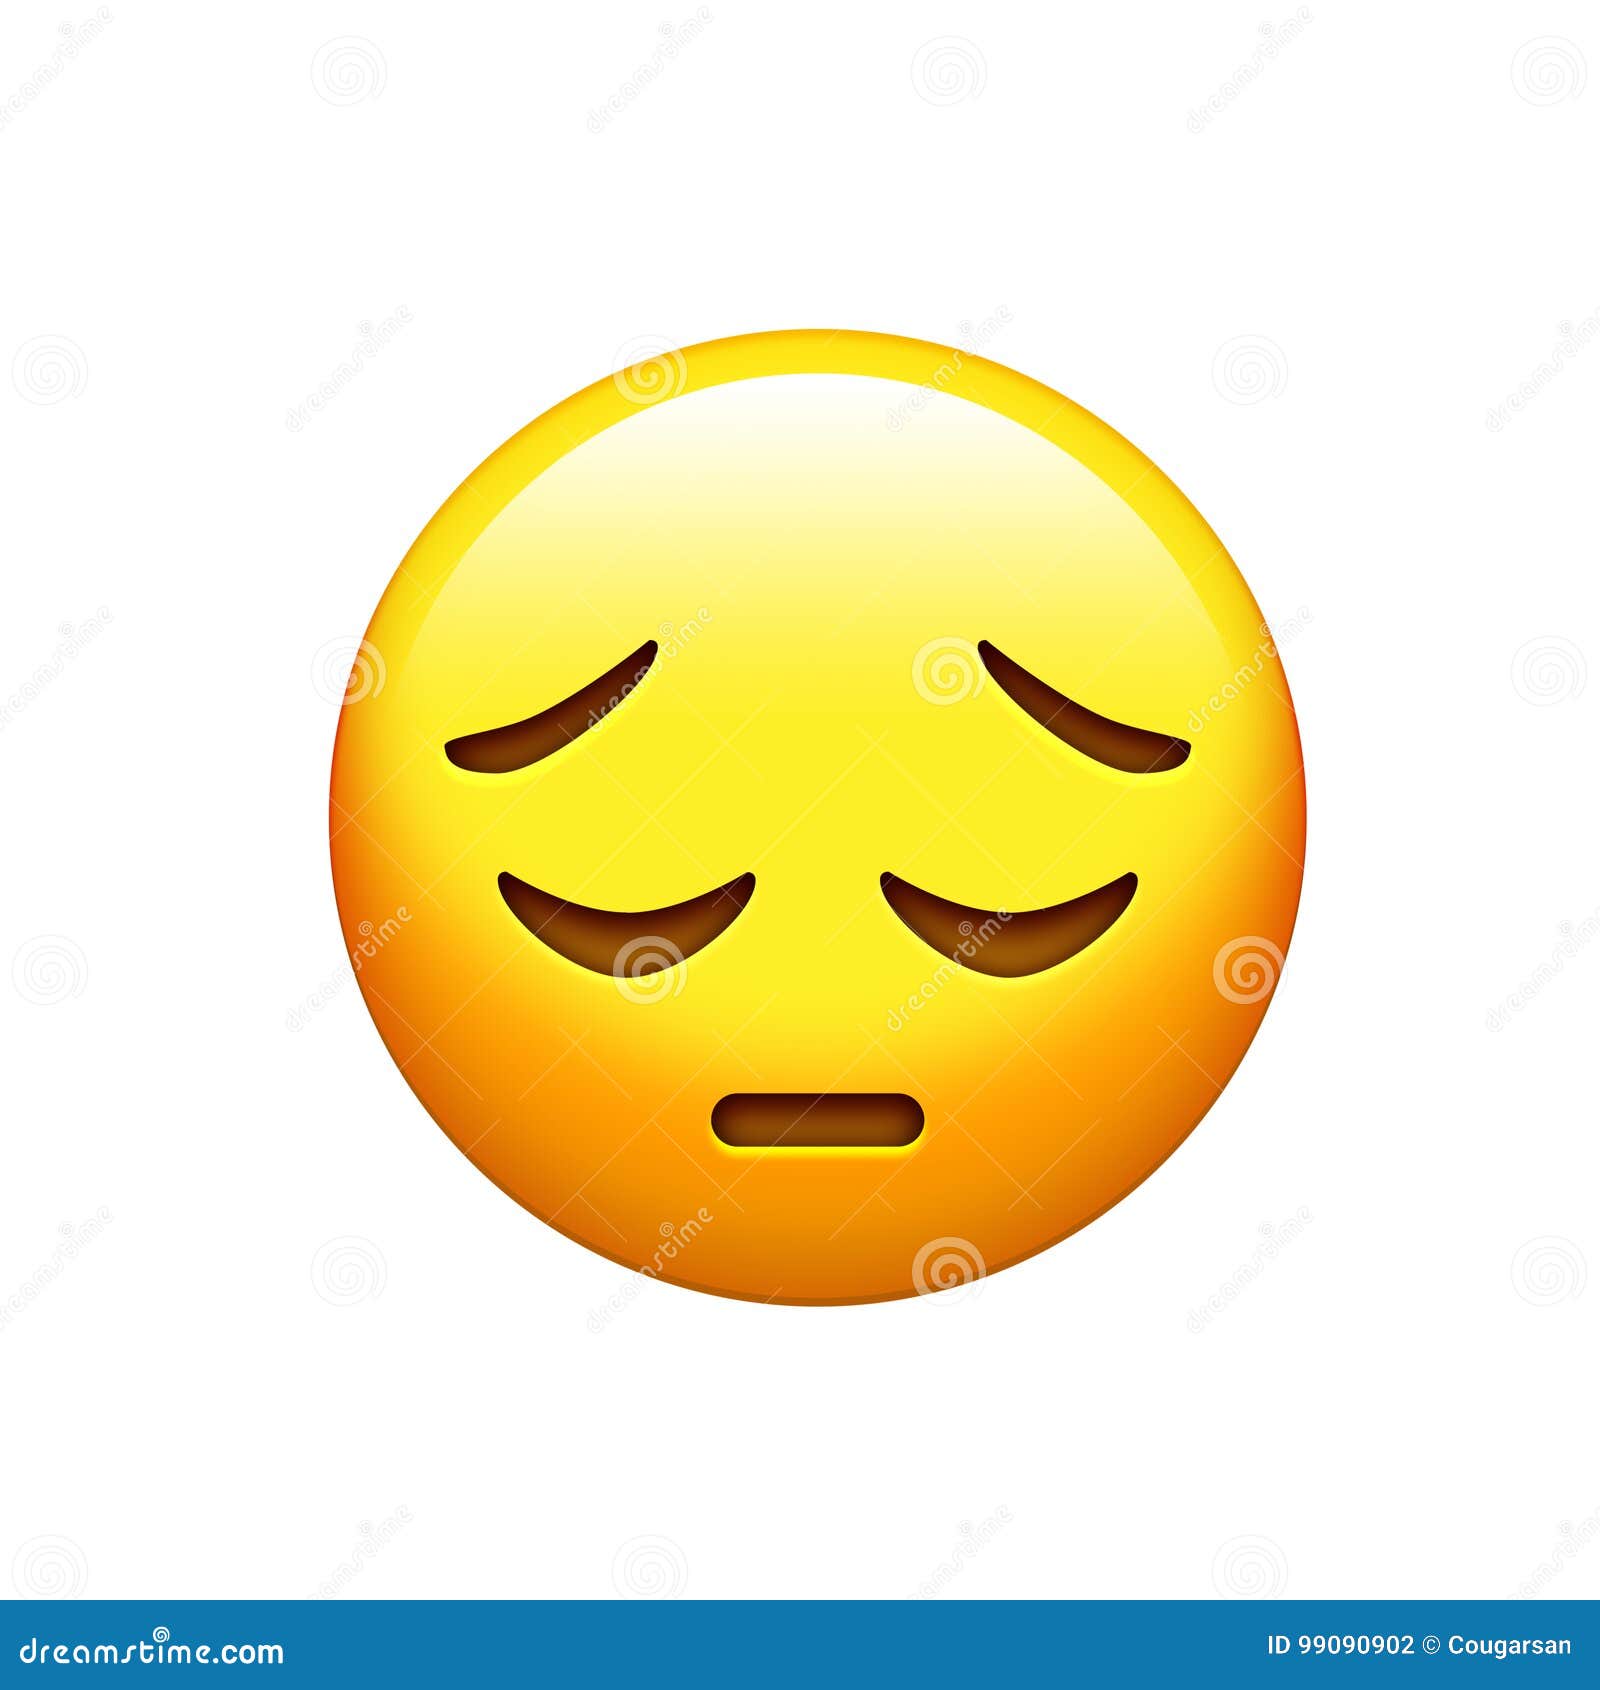  Emoji  Yellow Disappointed Upset Face And Closing  Eyes  